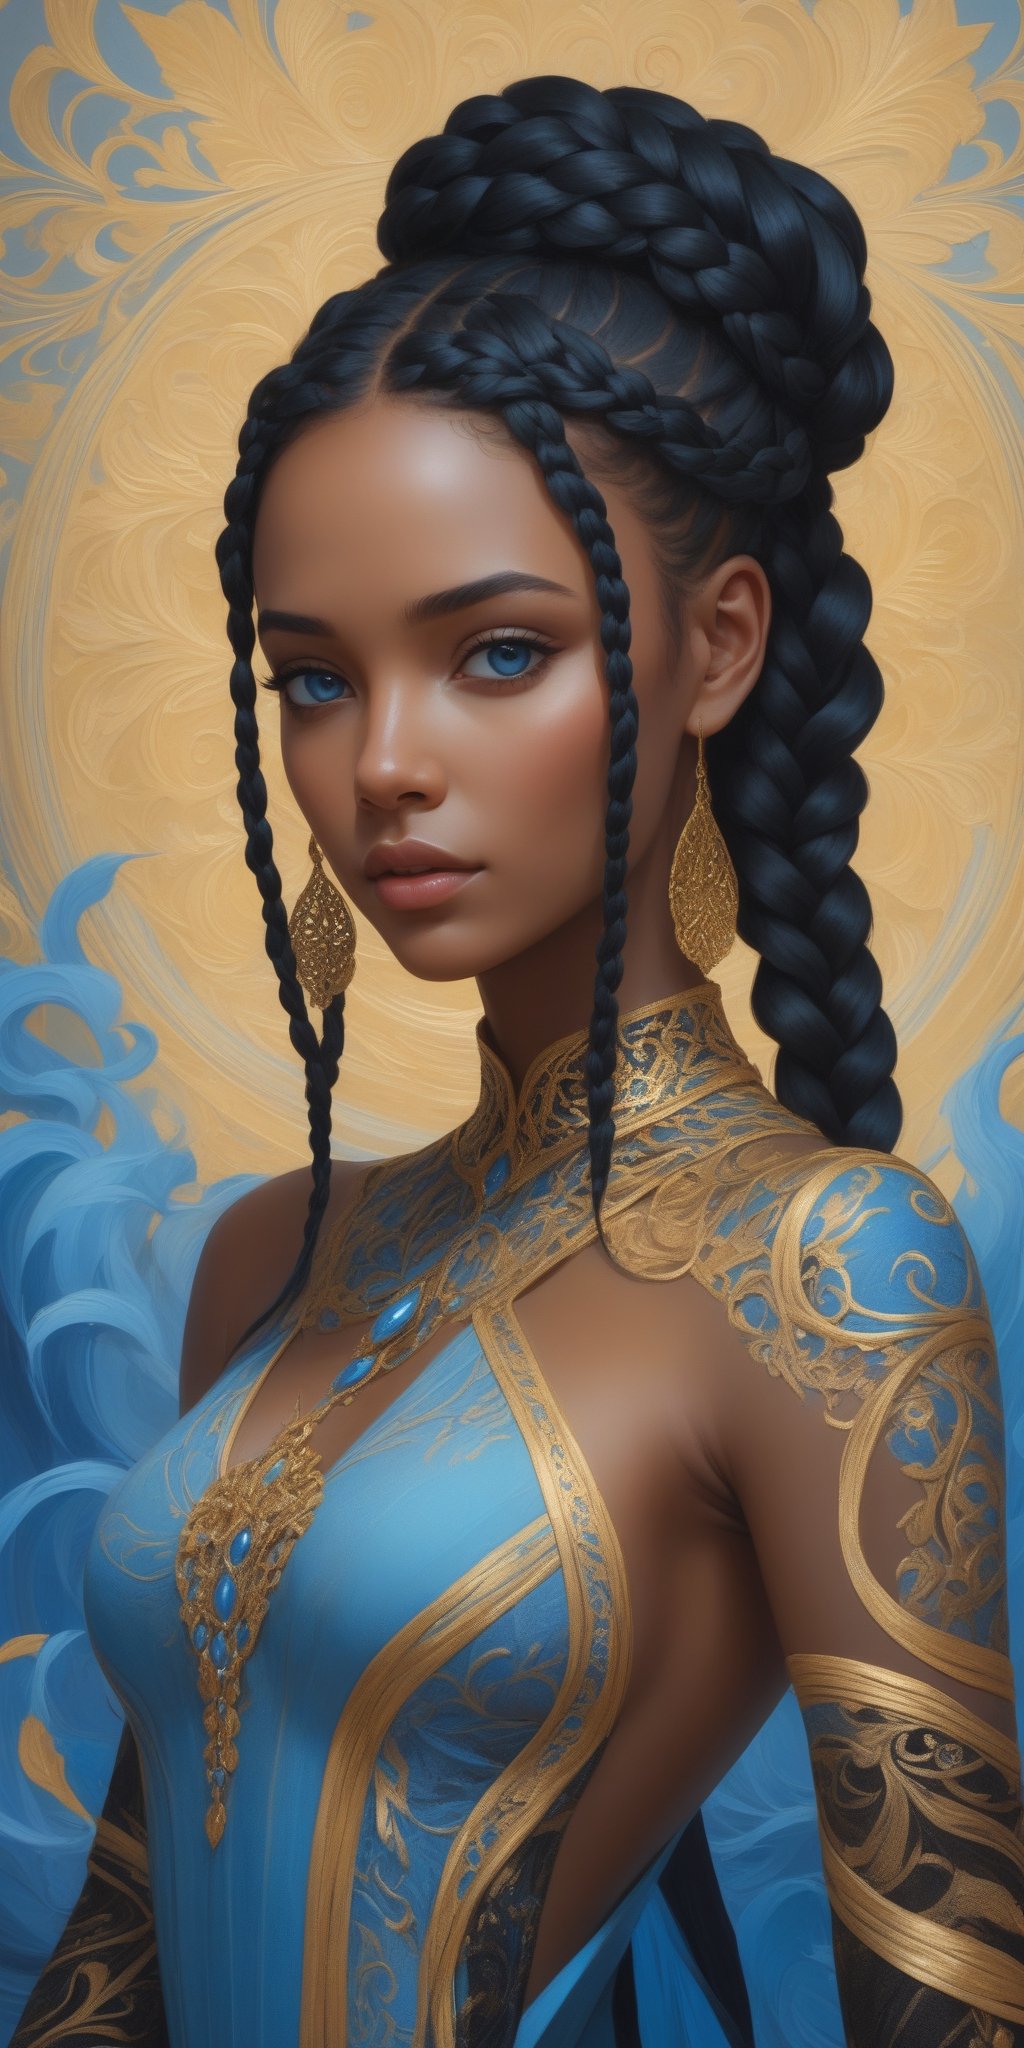 masterpiece, high quality, artwork, surrealism, abstract, absurdes, full-body_portrait of beautiful woman, black hair, braids, blue eyes, black dress with gold intricate ornament, pastel colors, oil painted, atrgerm, trending on ArtStation 